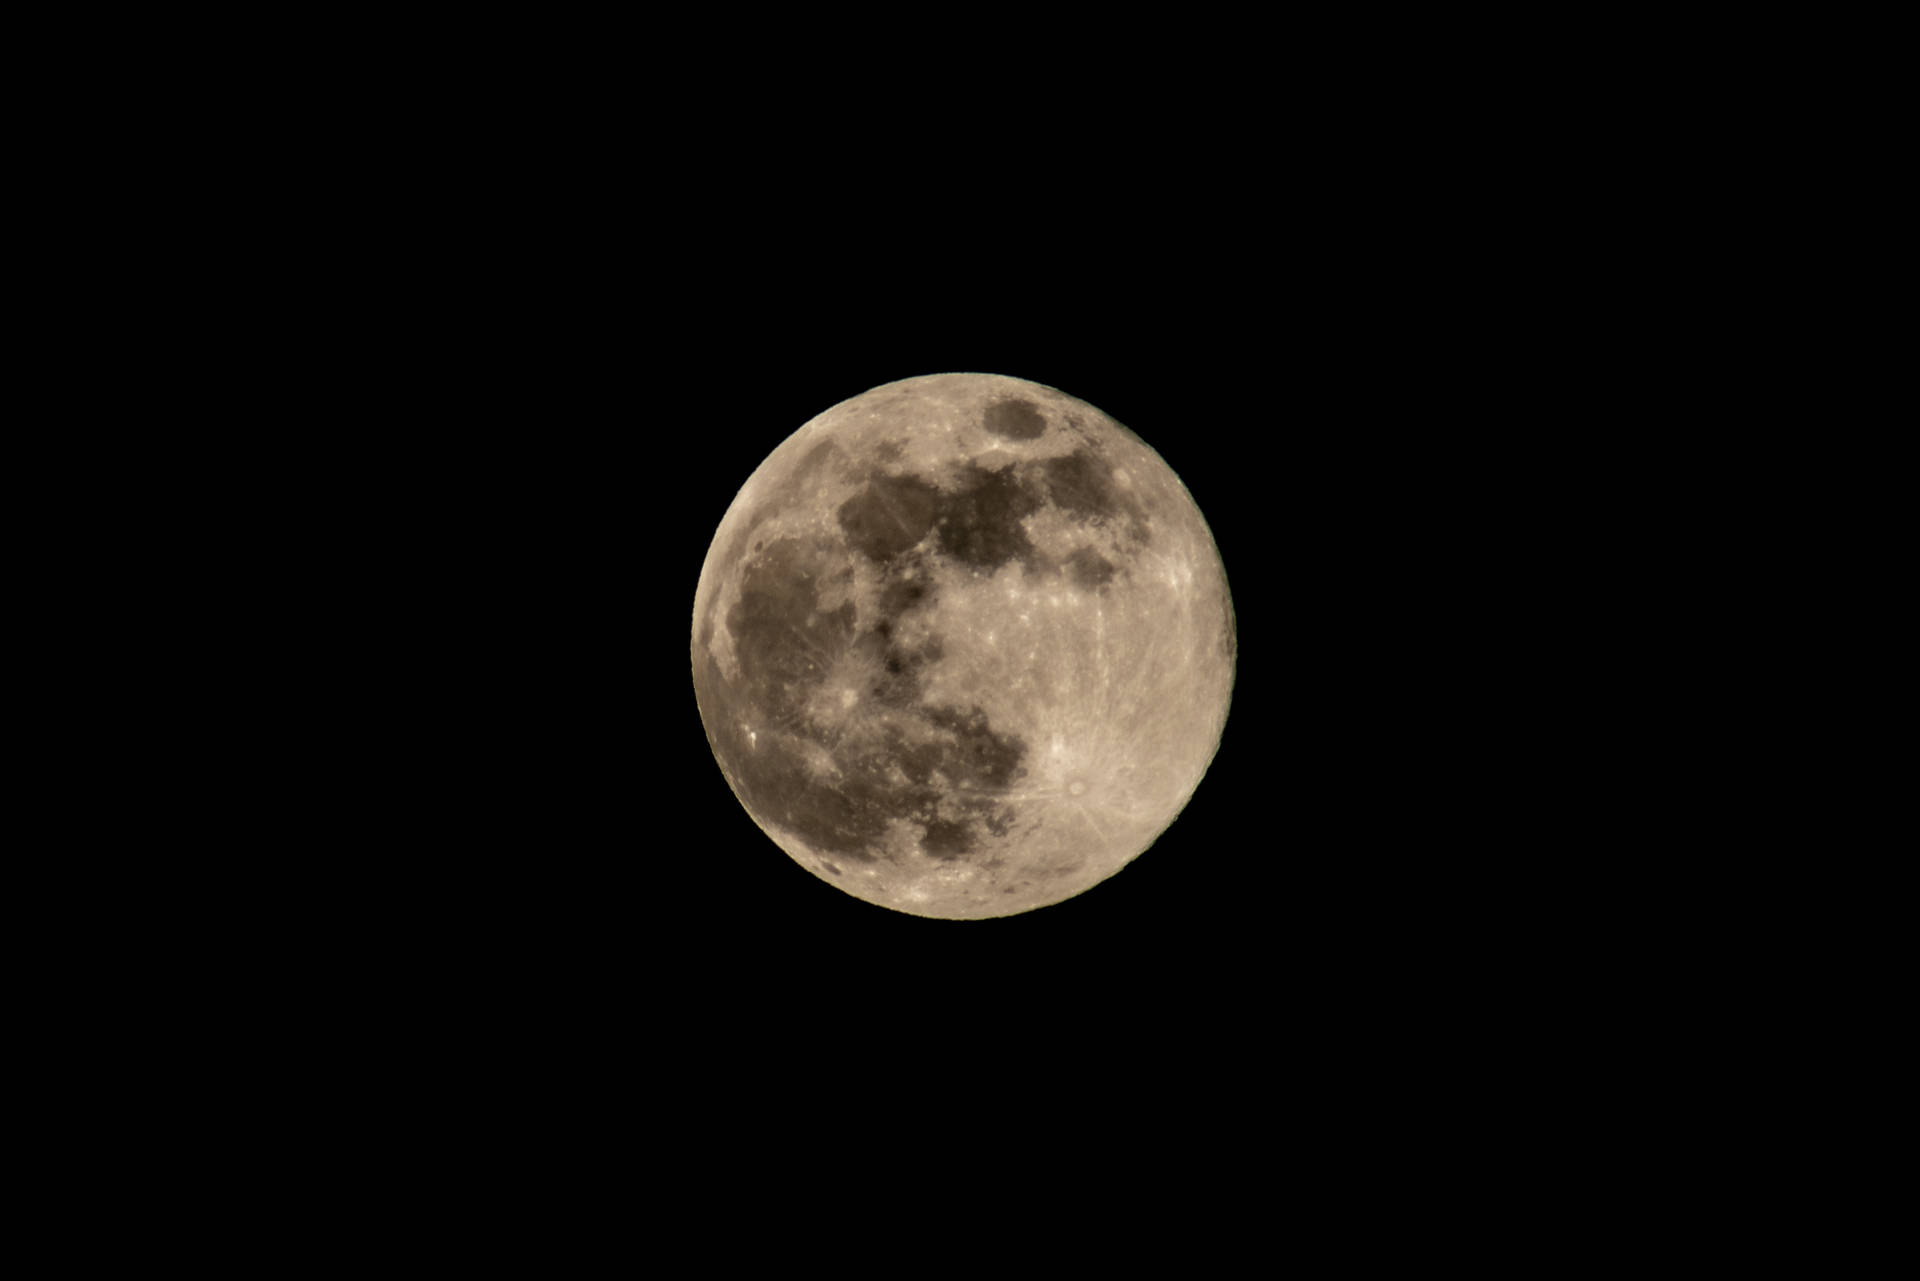 A Full Moon Is Seen In The Dark Sky Background